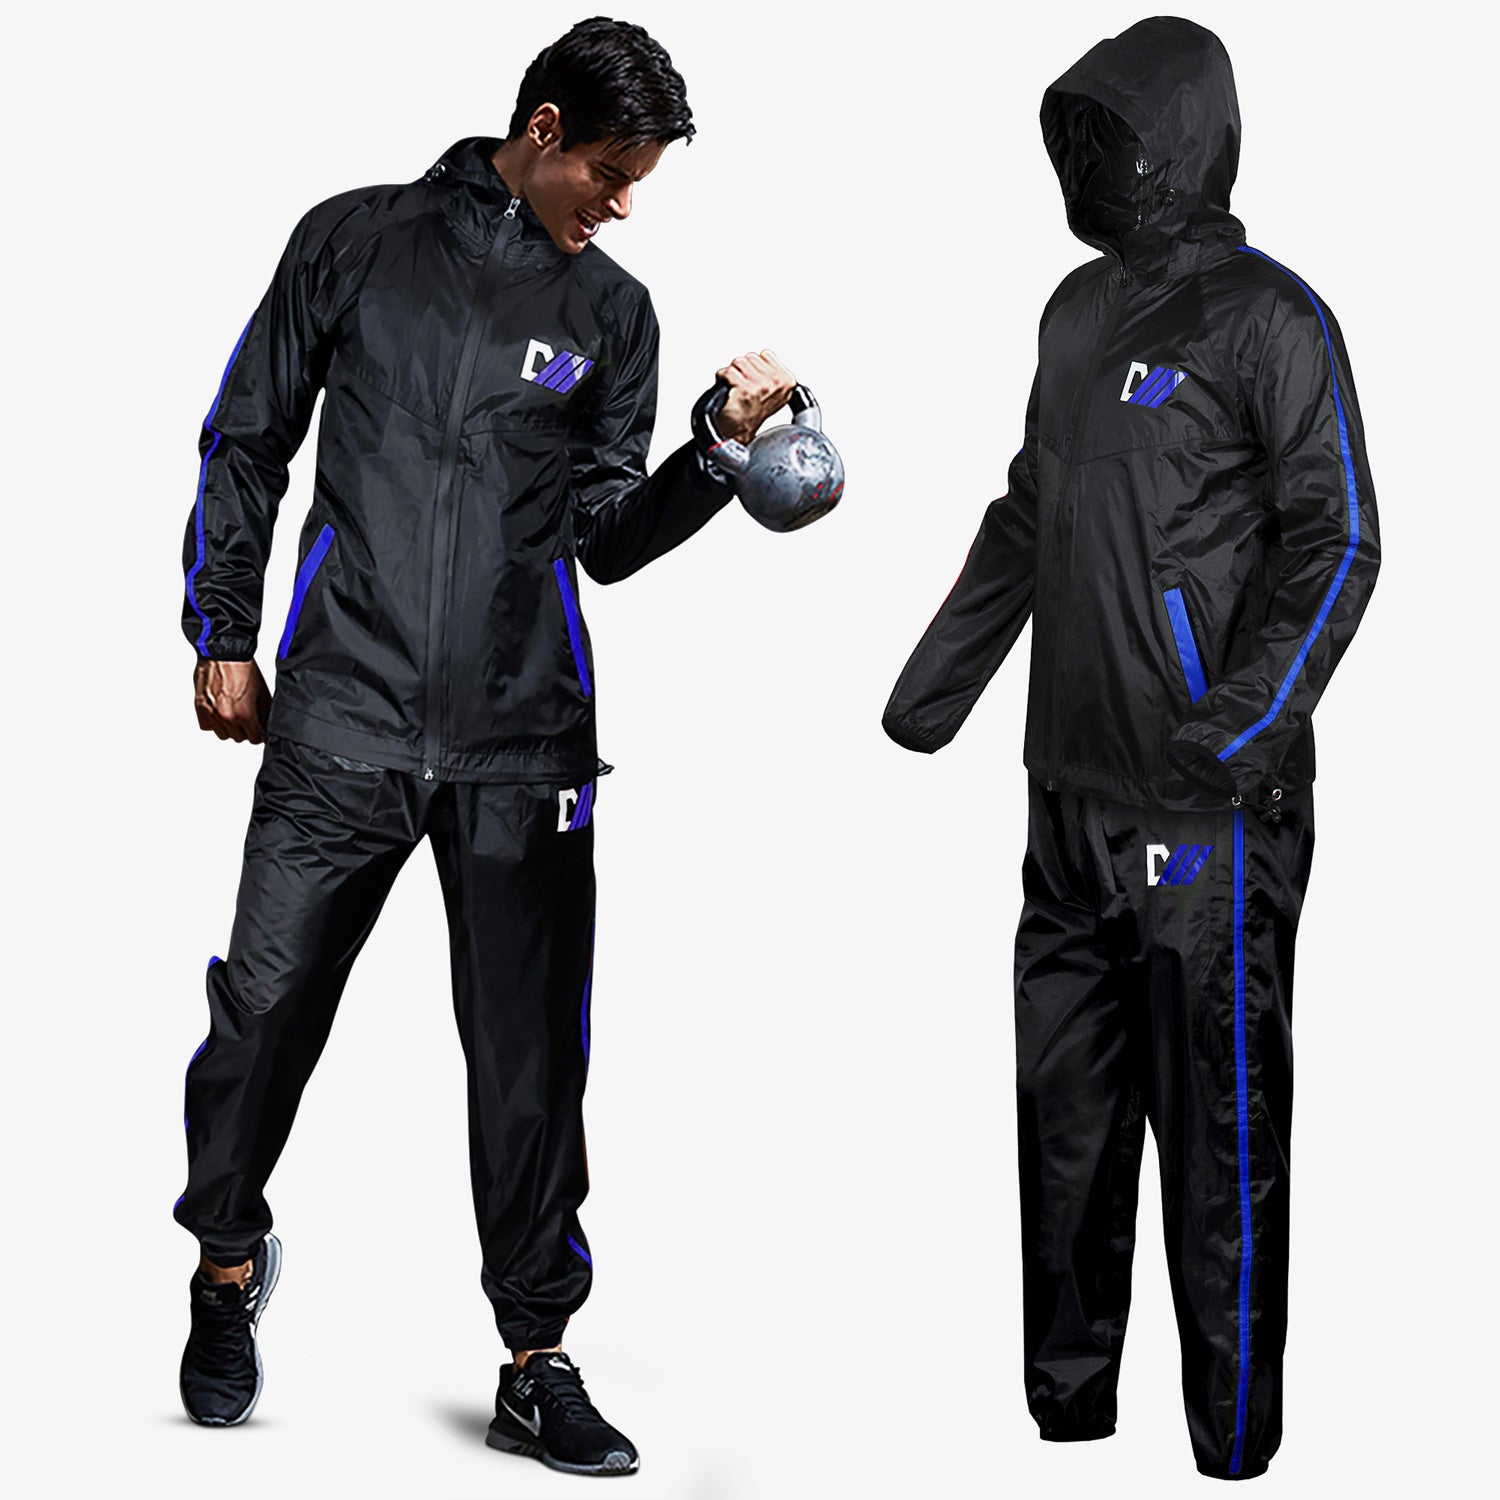 Sauna Suit for Weight Loss - Hot Suit for Workout | DMoose